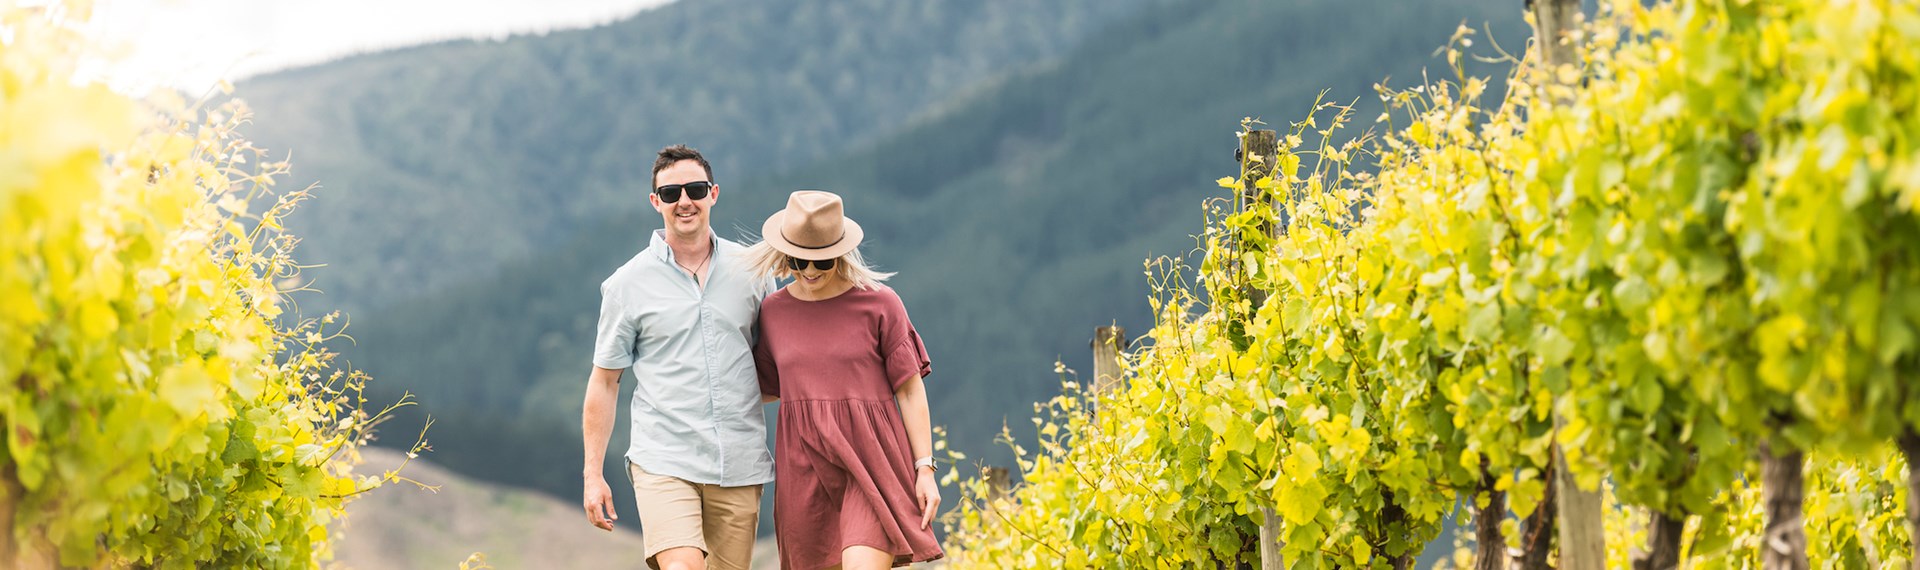 Couple arm in arm walking in a vineyard between rows of grapes as part of wine tours in Marlborough, at the top of New Zealand's South Island